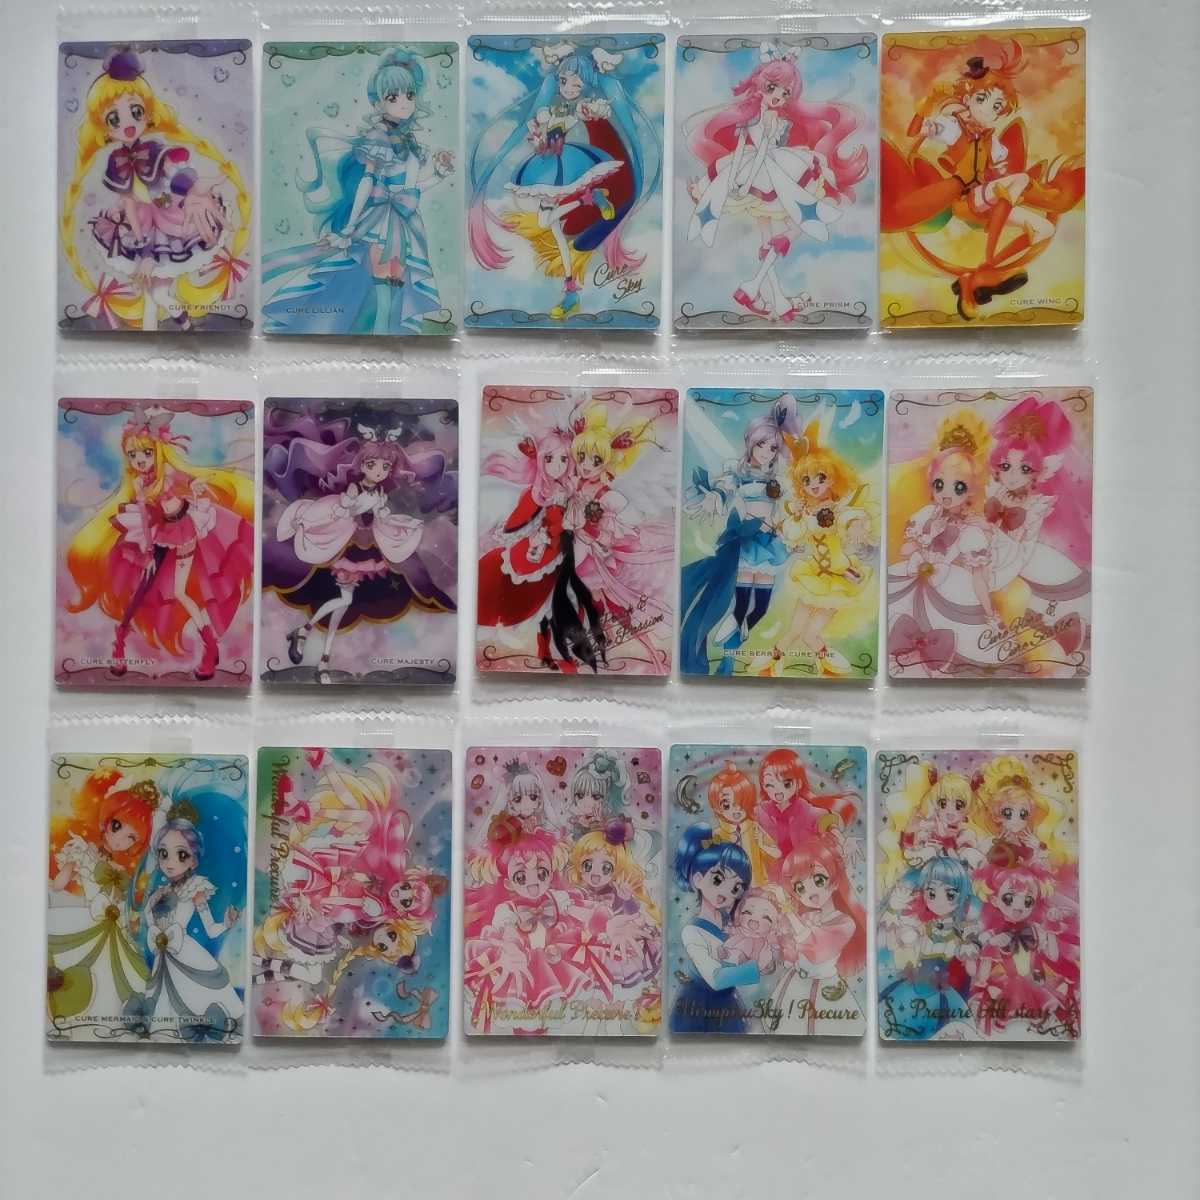  Precure card wafers 9 15 kind 15 pieces set Dub . none 